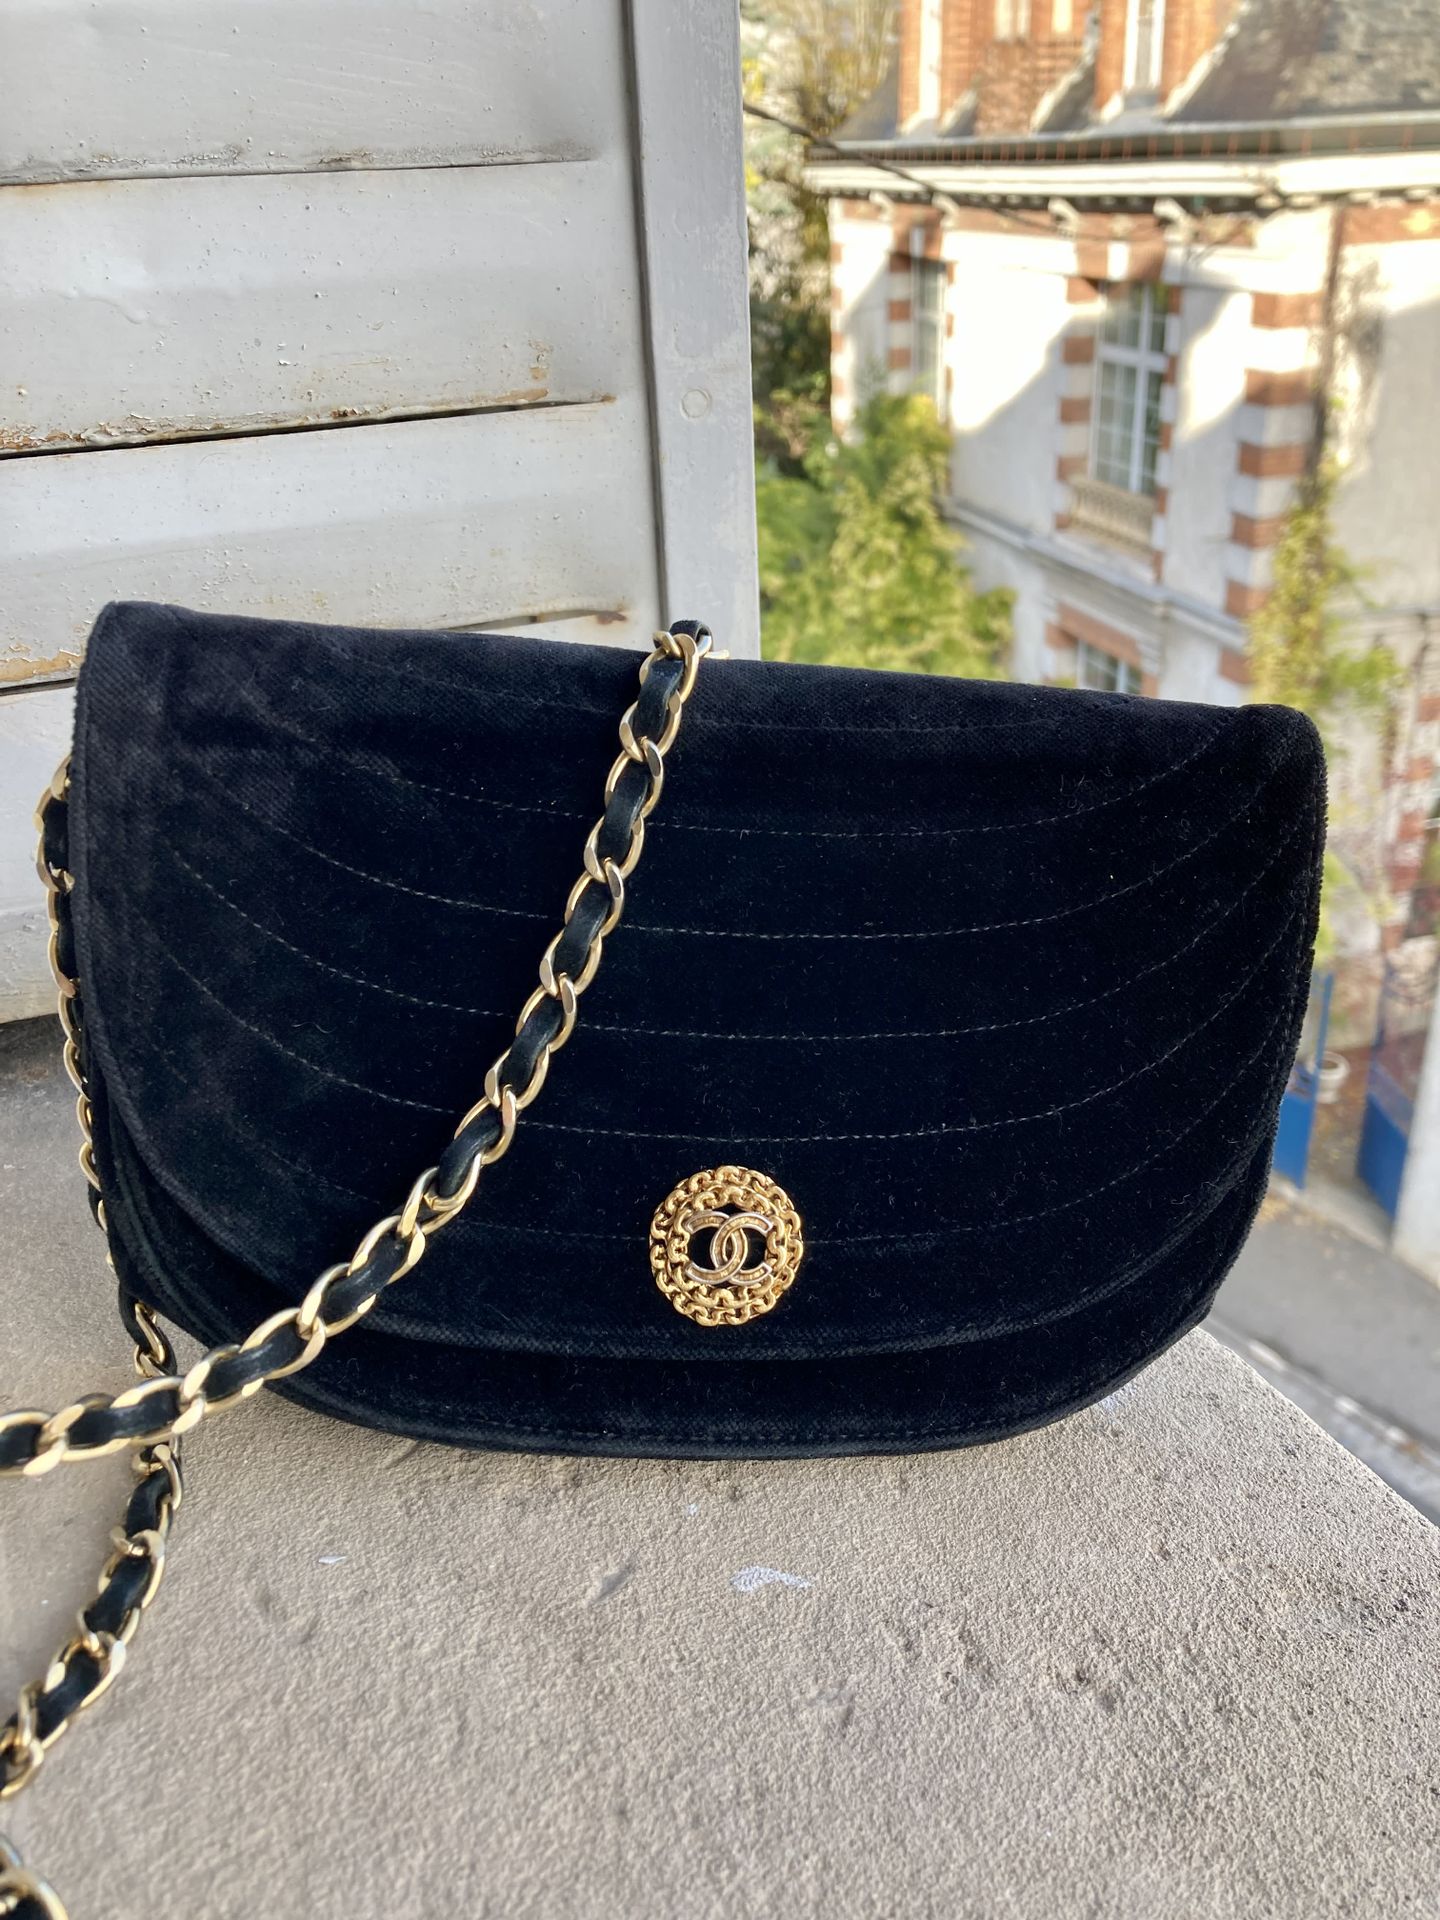 Null CHANEL Evening bag in black velvet, chain handle. 20 x 15 cm Good condition